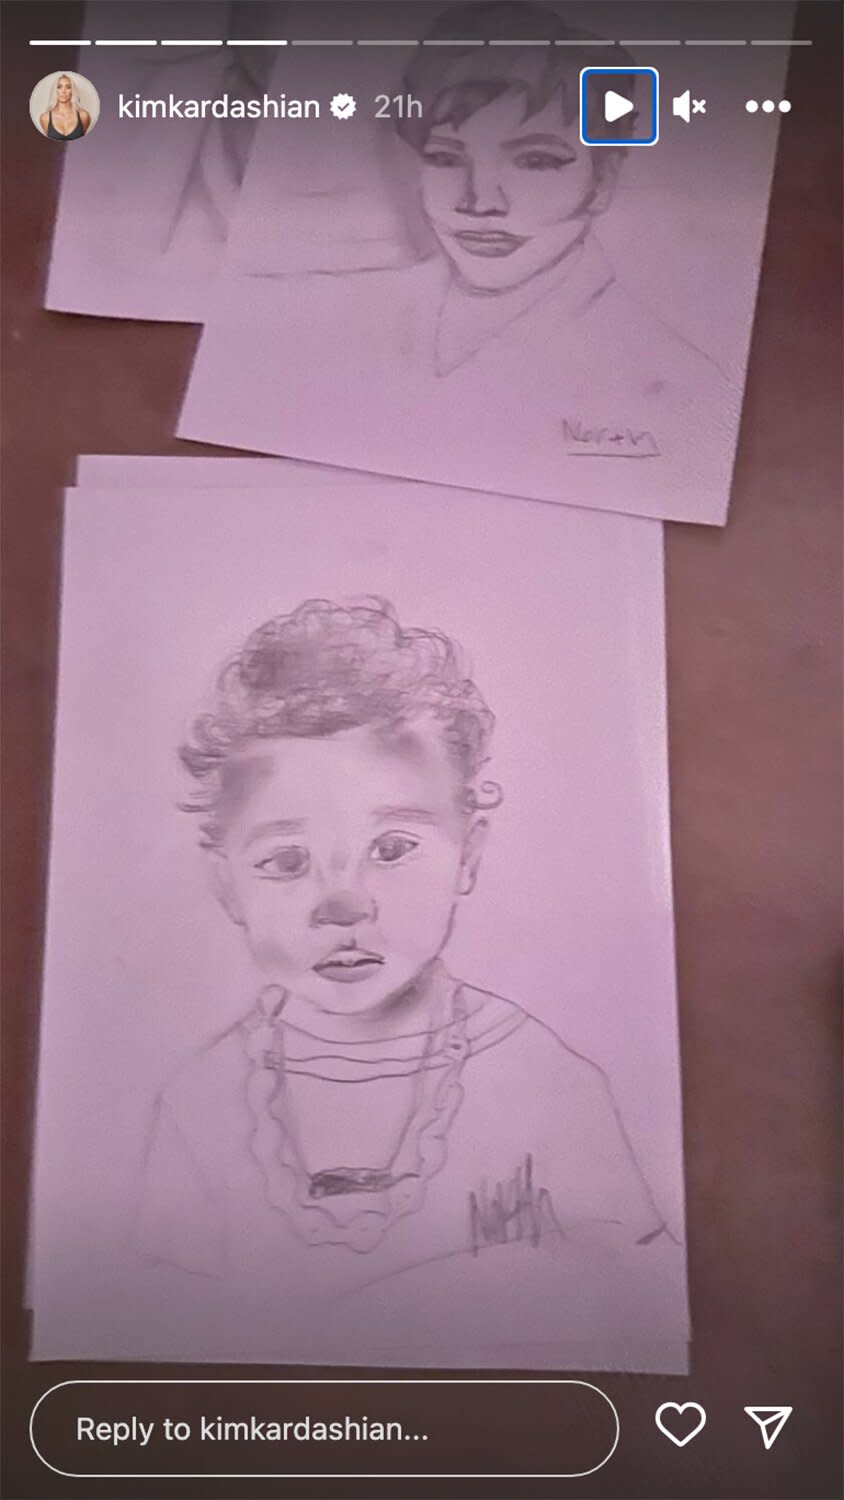 Kim Kardashian Shares North's Pencil Drawings of Little Brother Psalm and Grandmother Kris Jenner